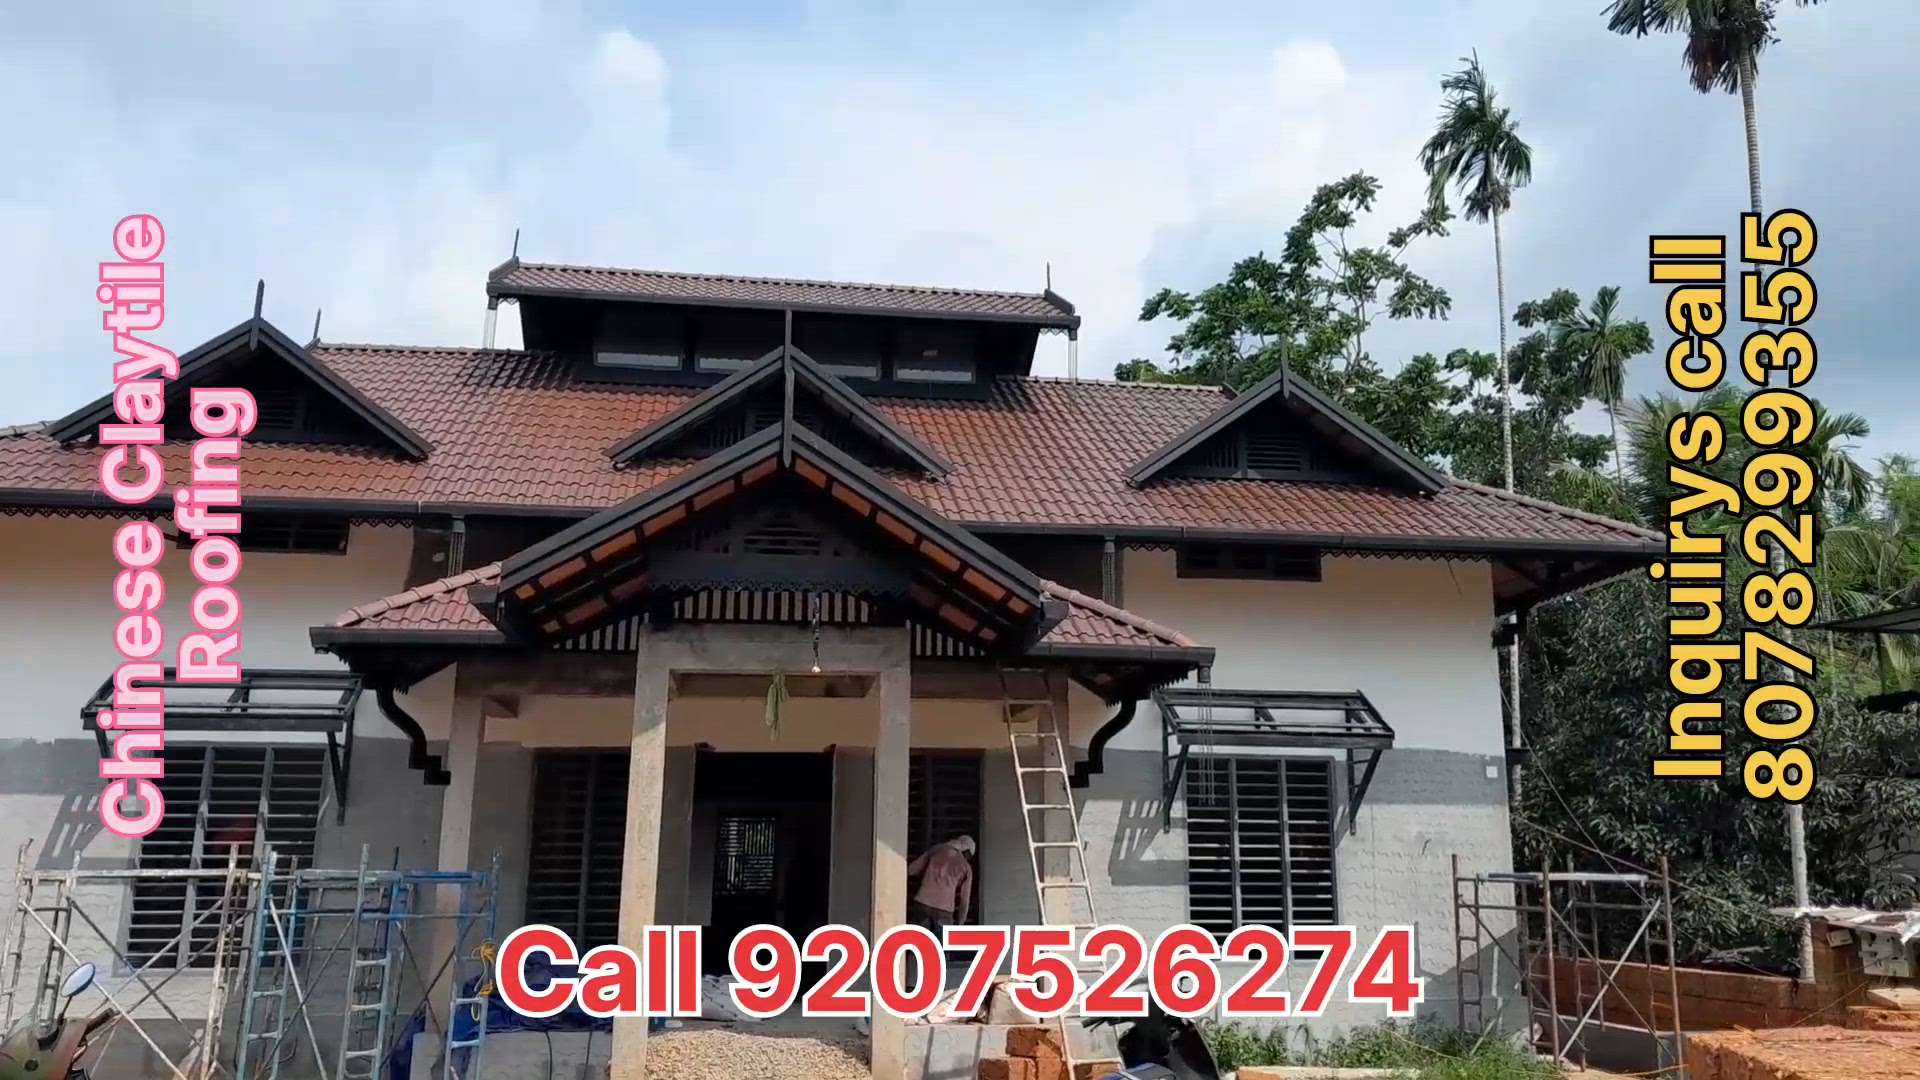 #chainees-claytile-Roofing